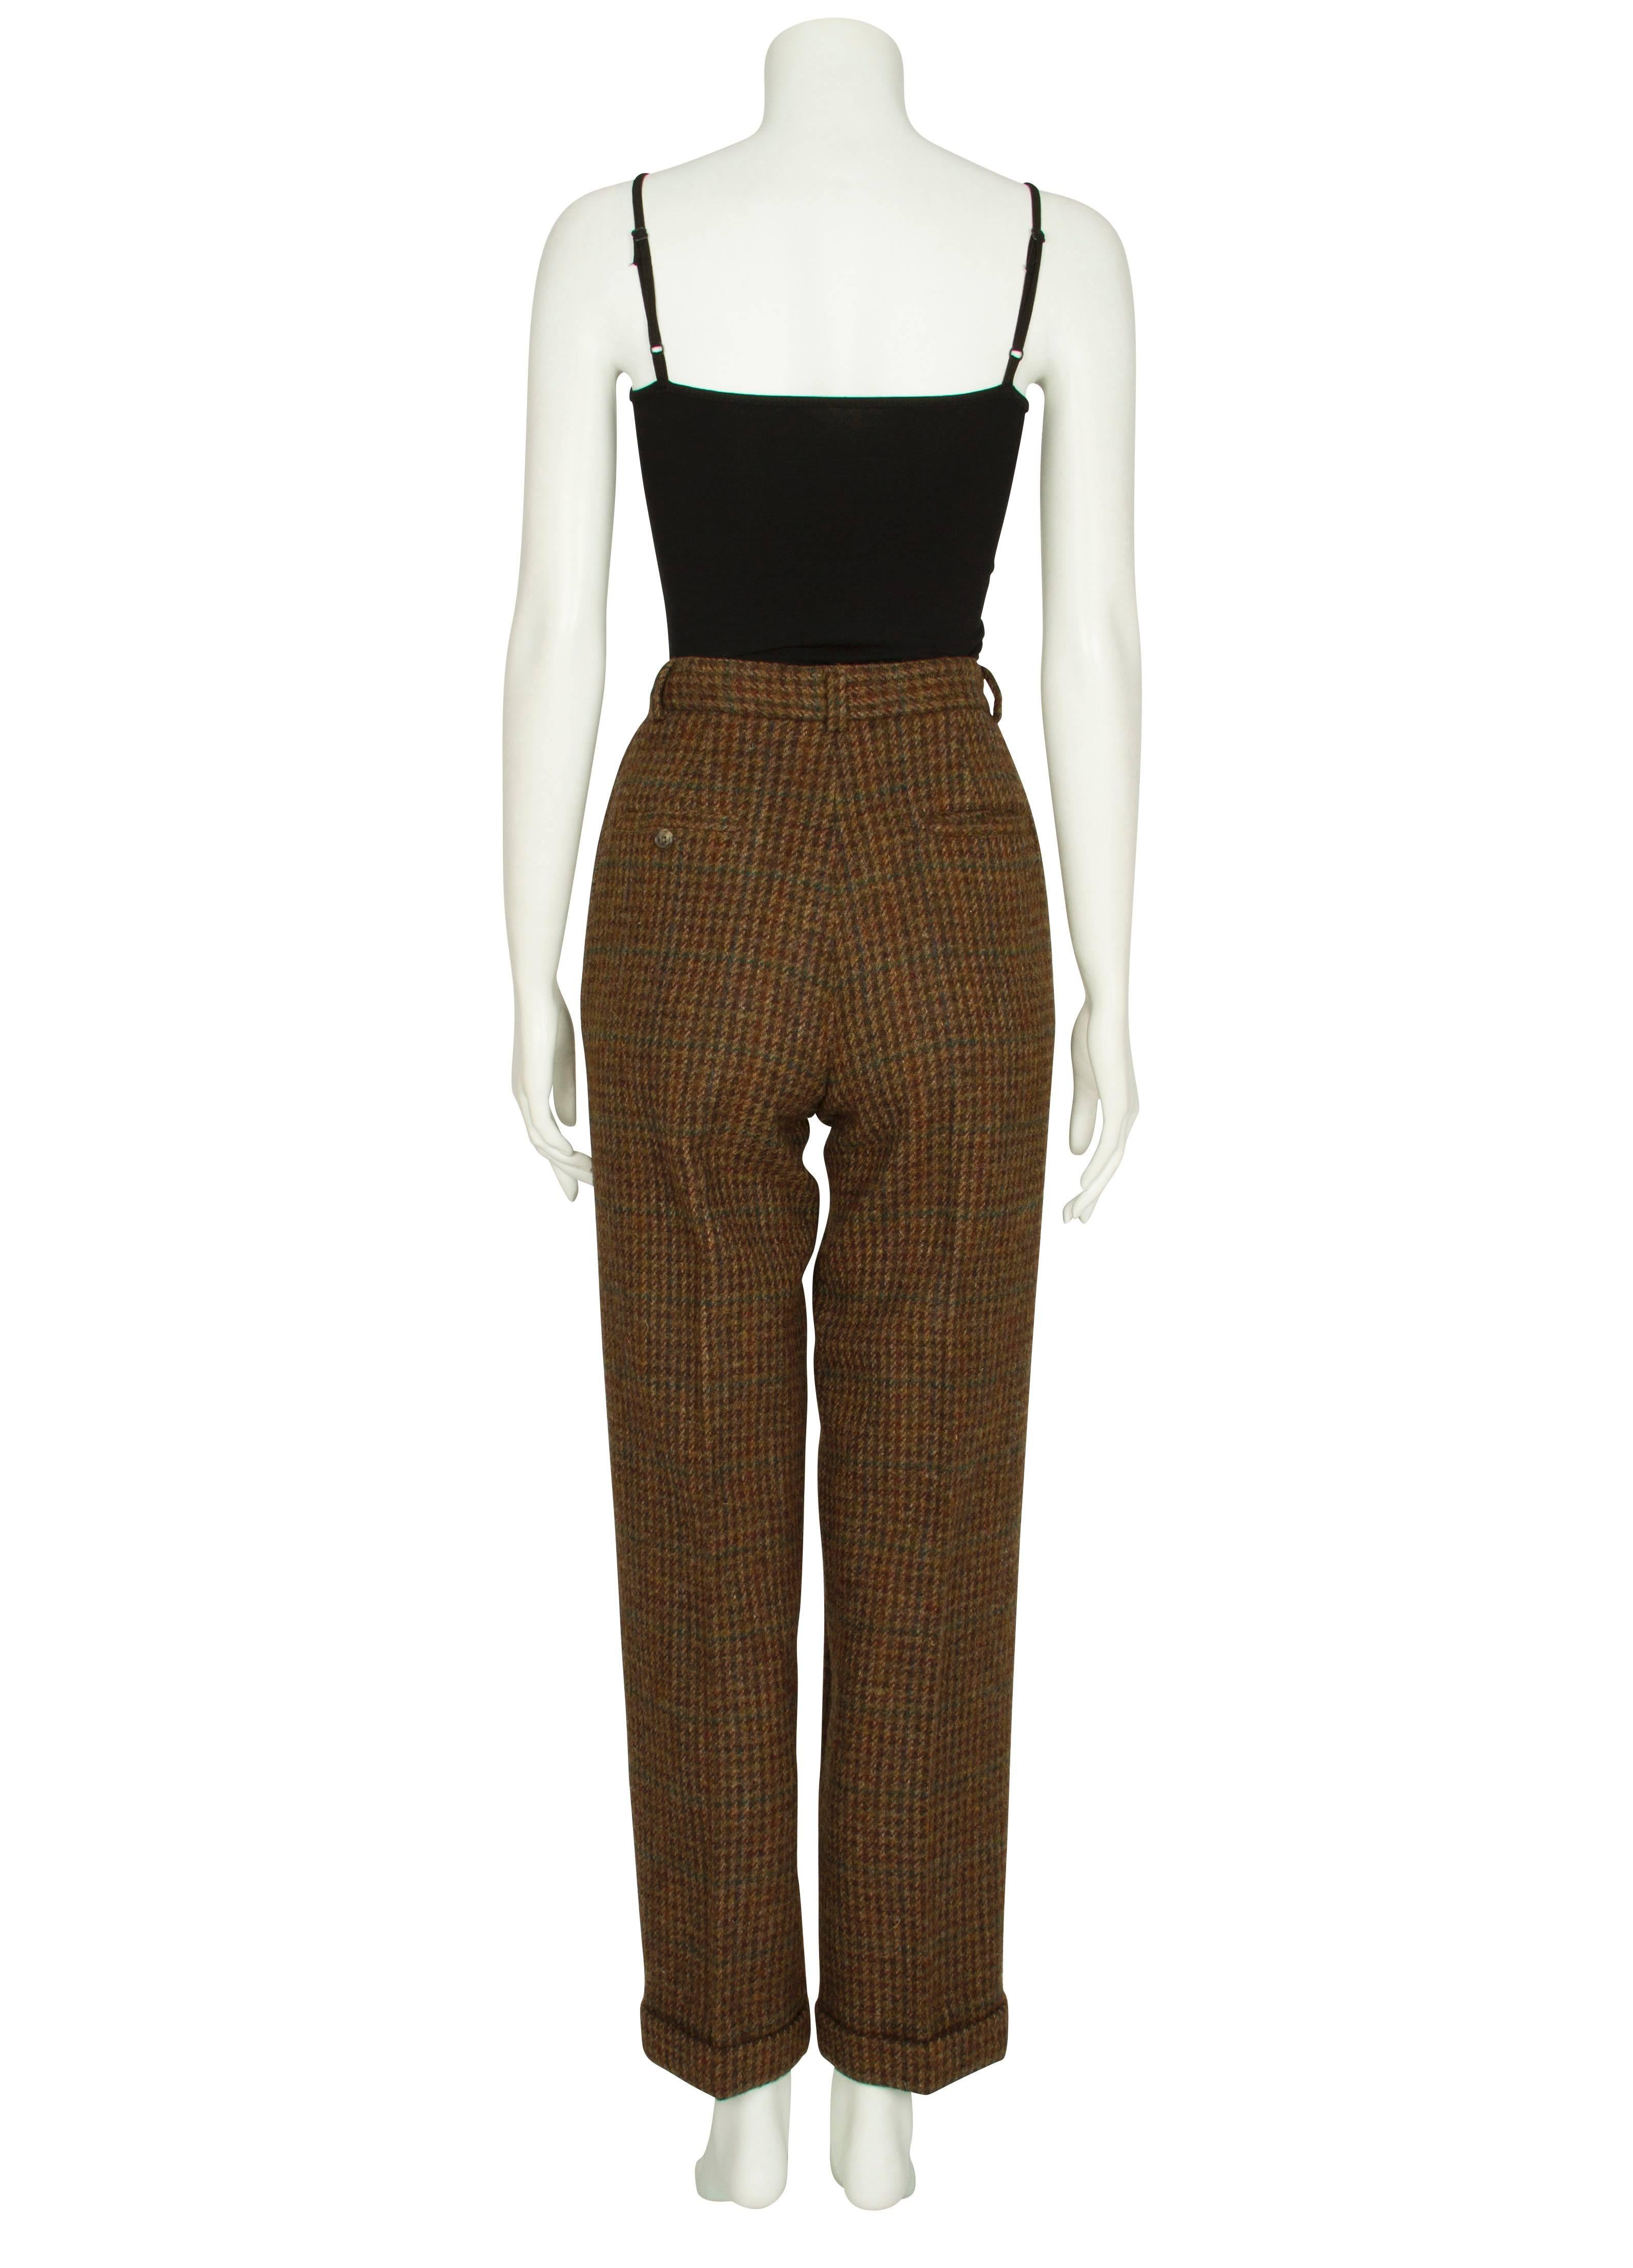 A pair of 1980s Ralph Lauren brown, green and burgundy houndstooth wool trousers. The heavy, textured trousers have a fitted high waist and wide pleated legs which gently taper at the ankle into wide turned-up cuffs. The trousers feature two deep